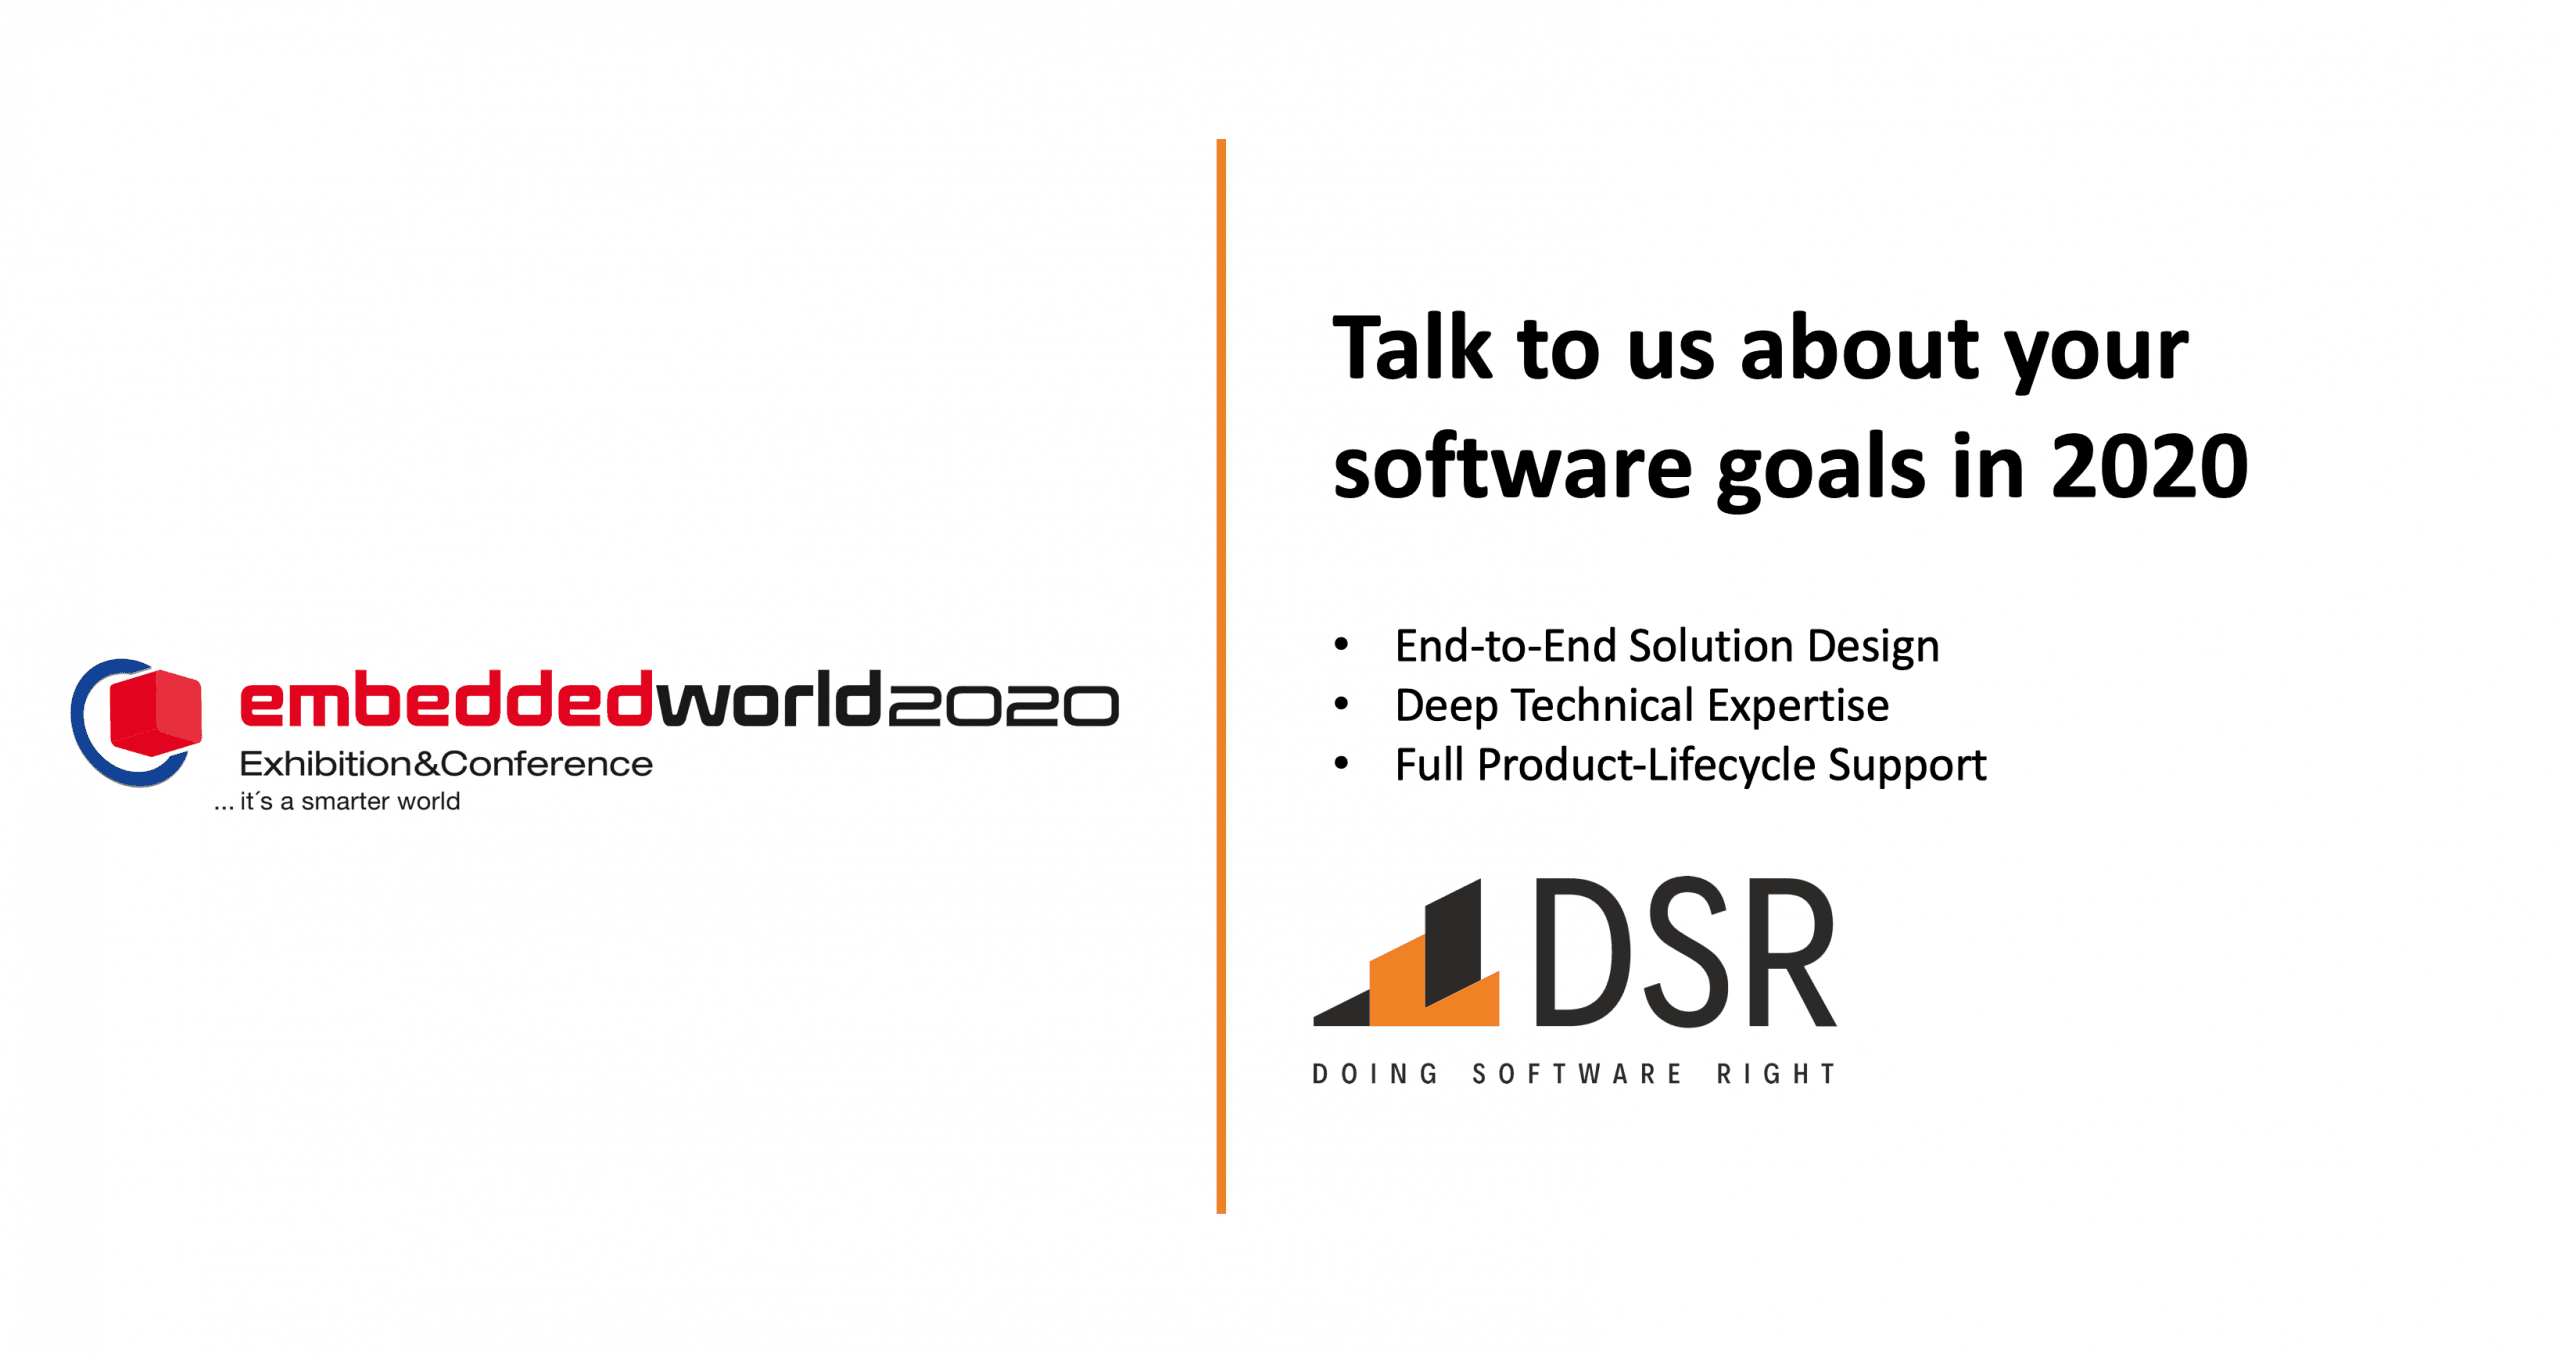 DSR attends Embedded World 2020 to meet with partners, prospective clients